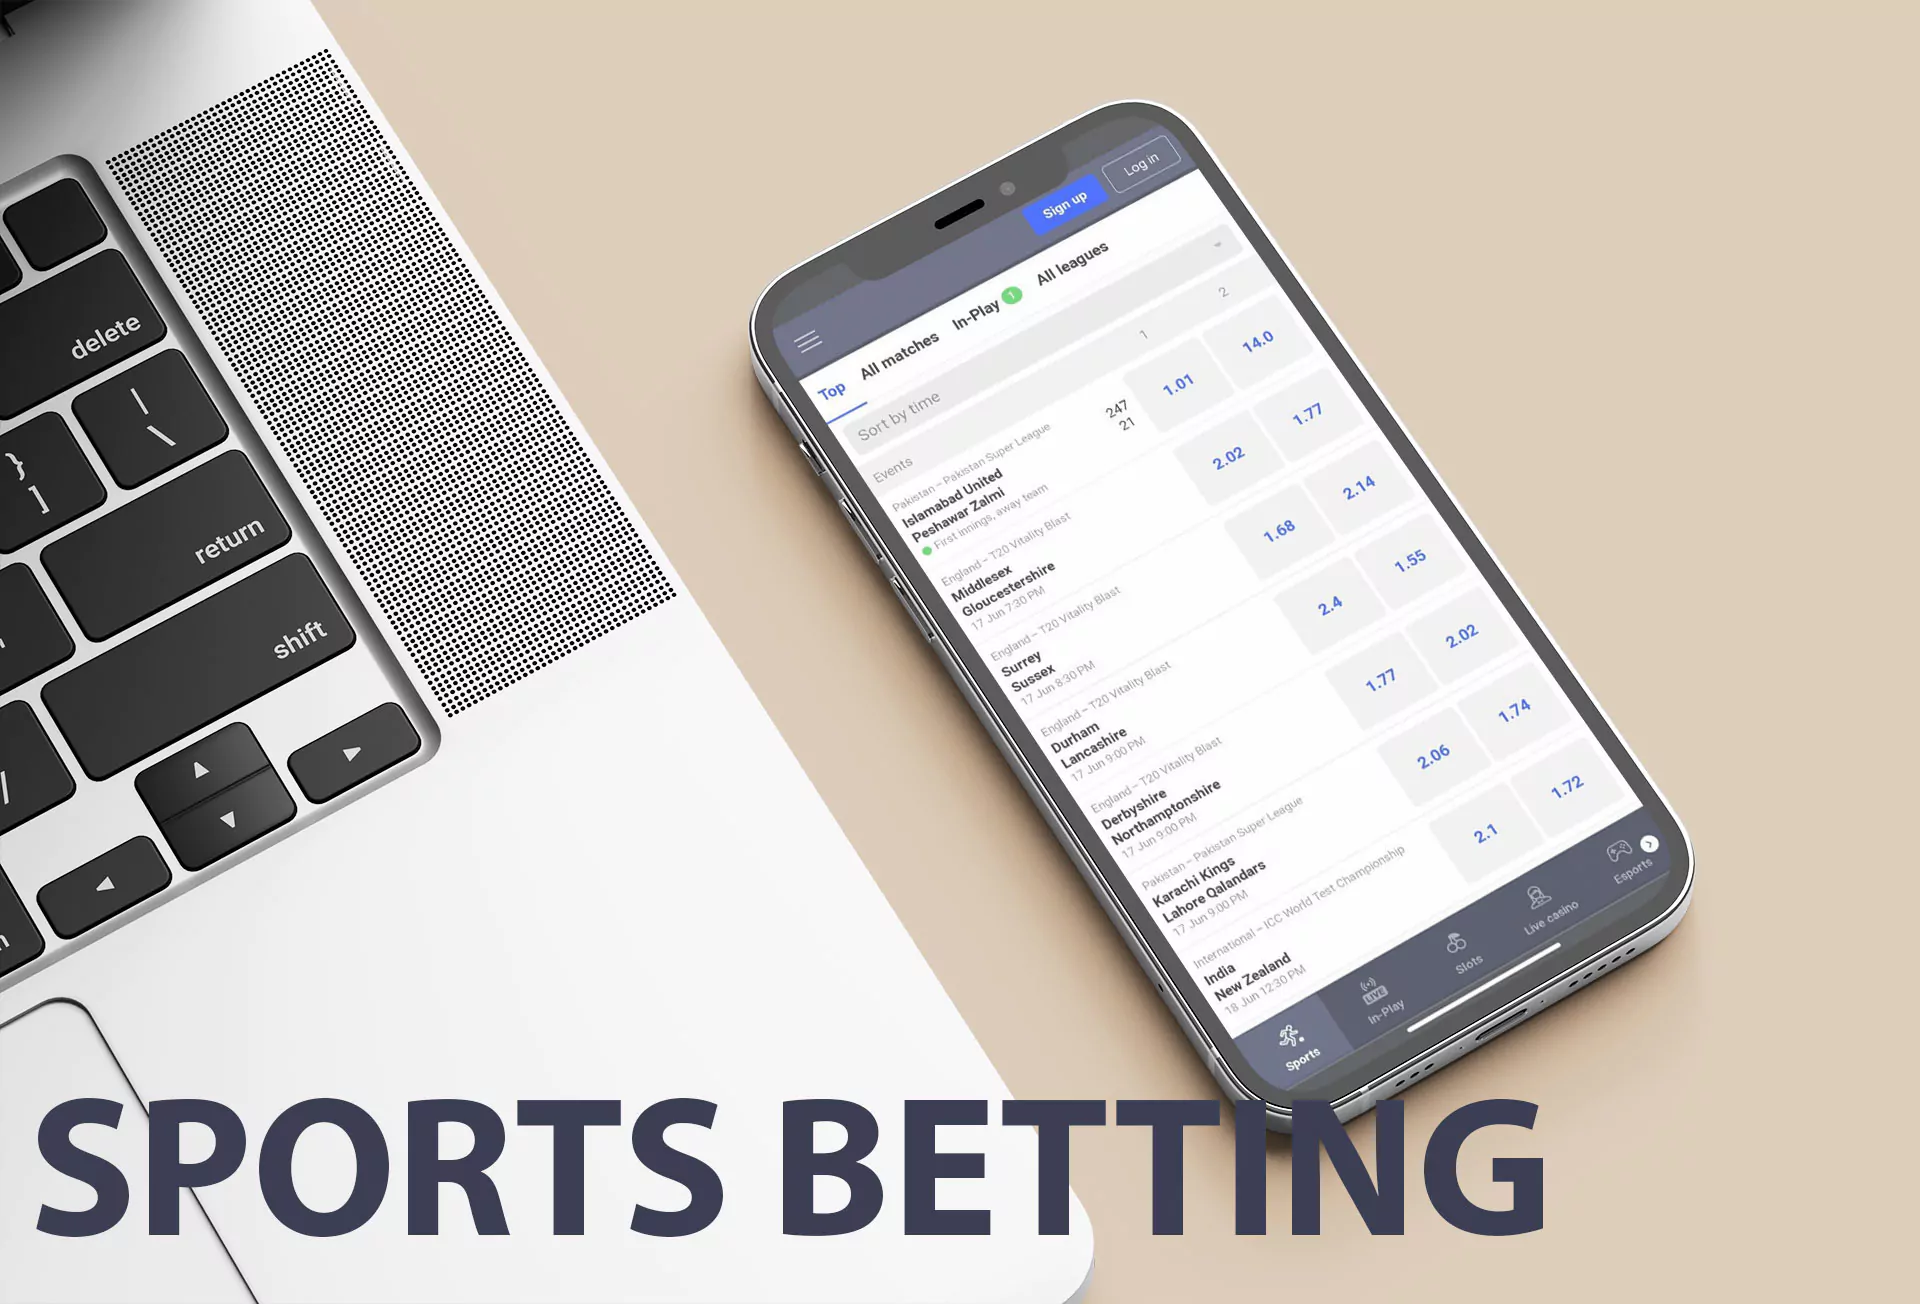 Betmaster sportsbook has a long list of available sports fot betting.